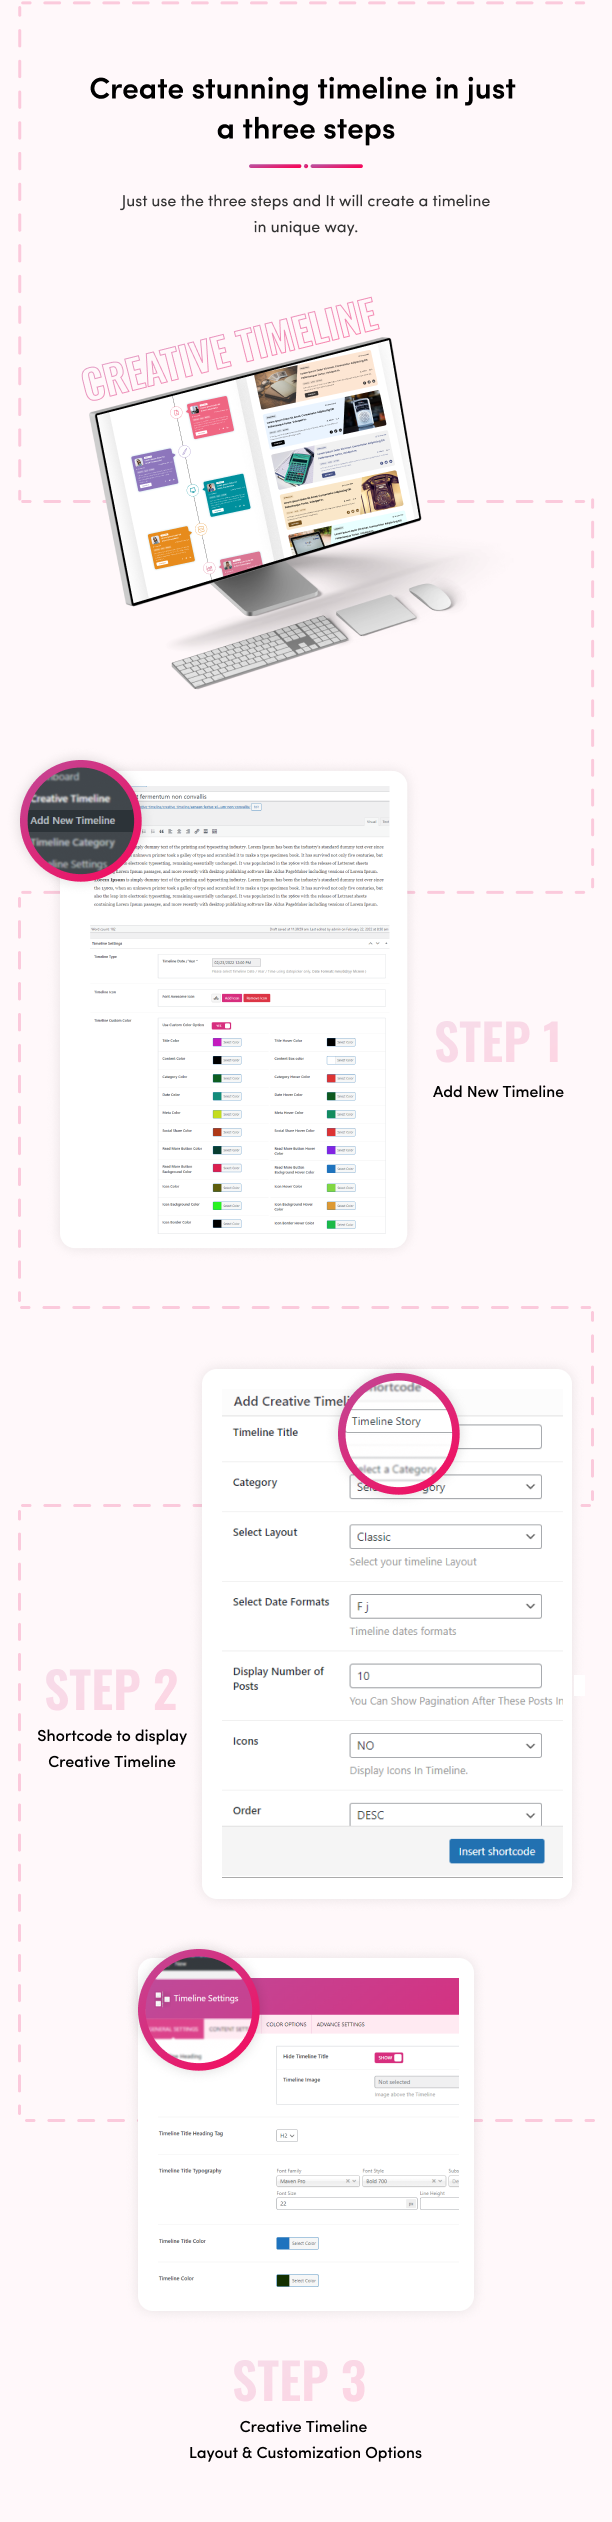 Create a stunning timeline in just three steps